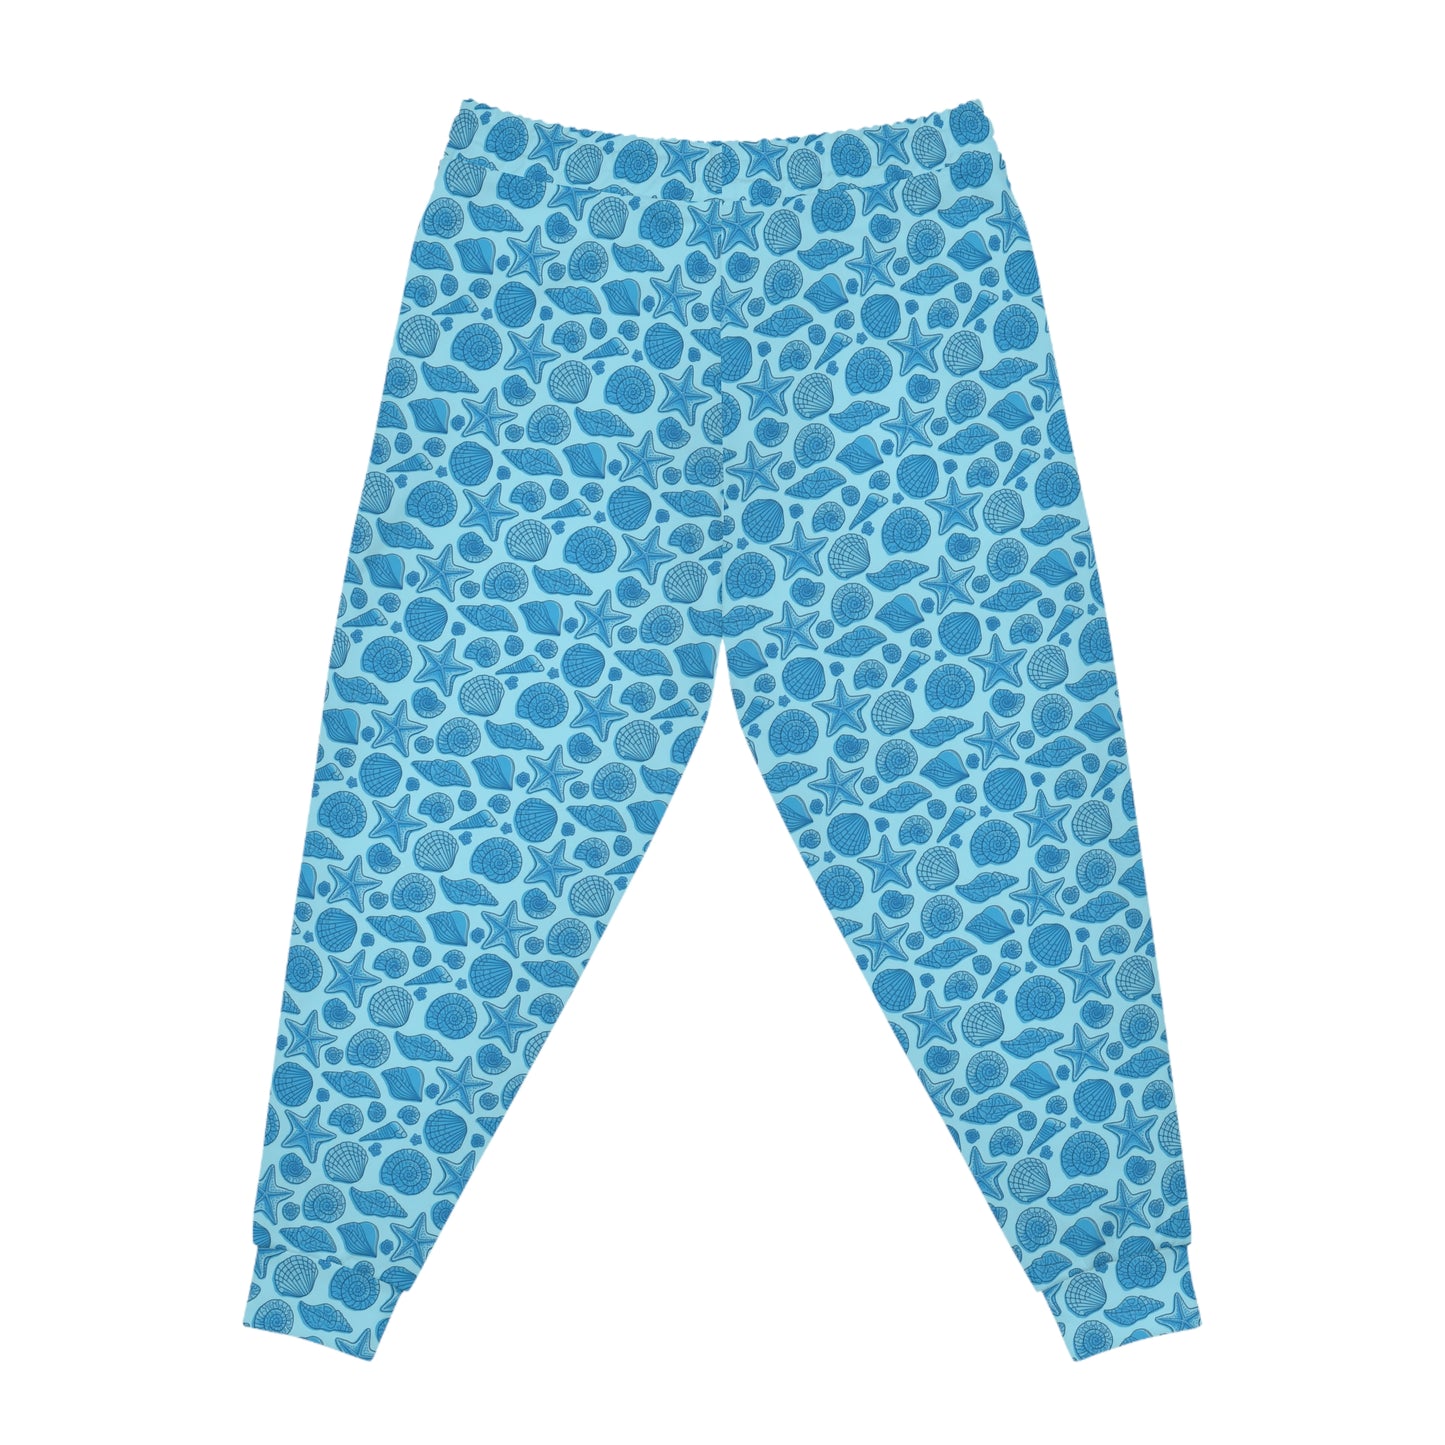 Blue Mermaid Starfish Seashell Collection - Dive into Ocean-inspired Beauty! Athletic Joggers, Sweatpants Athleticwear